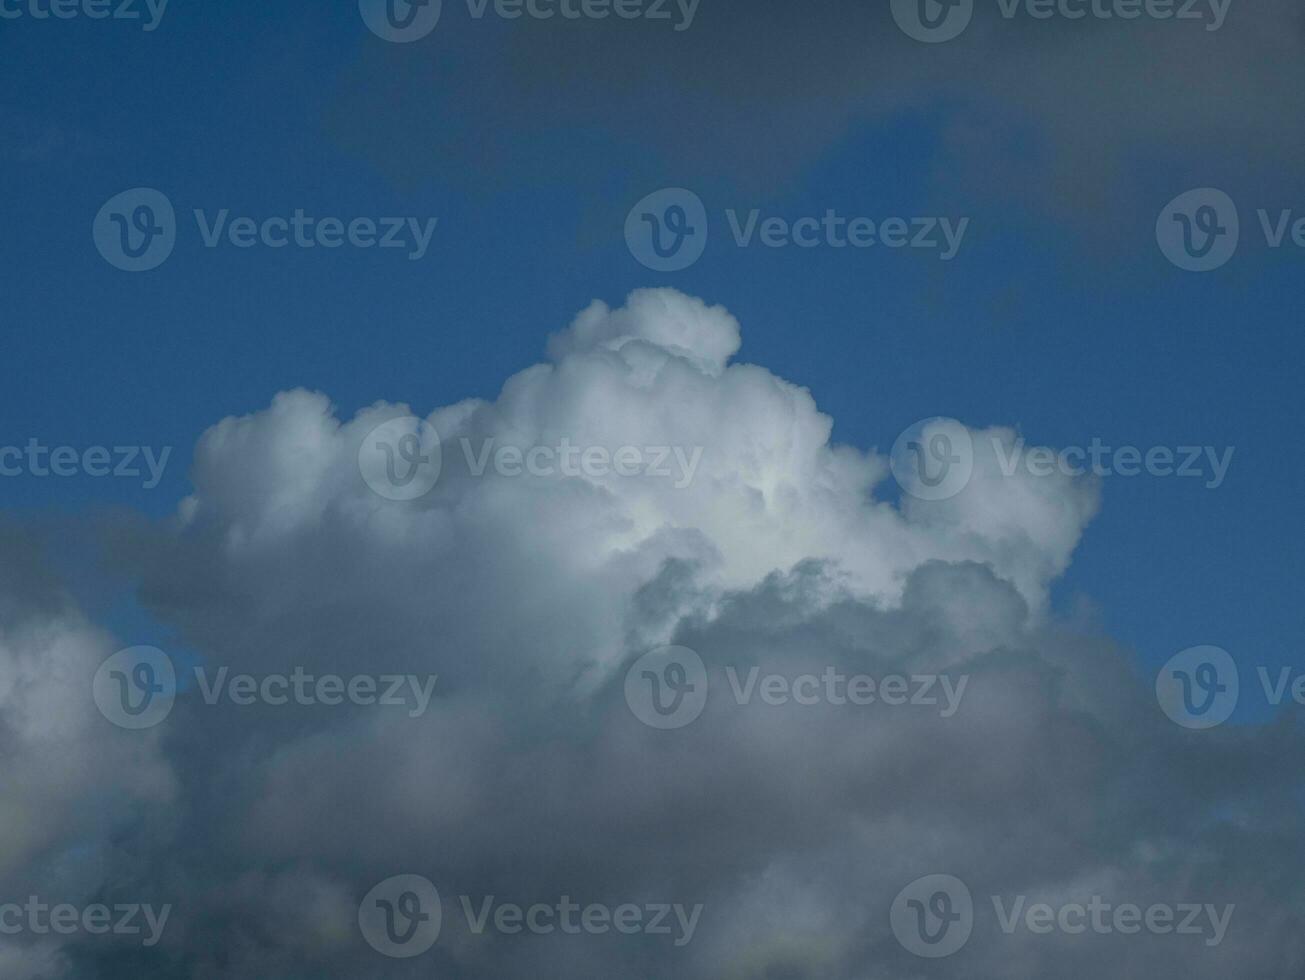 White fluffy clouds in the stormy sky background photo